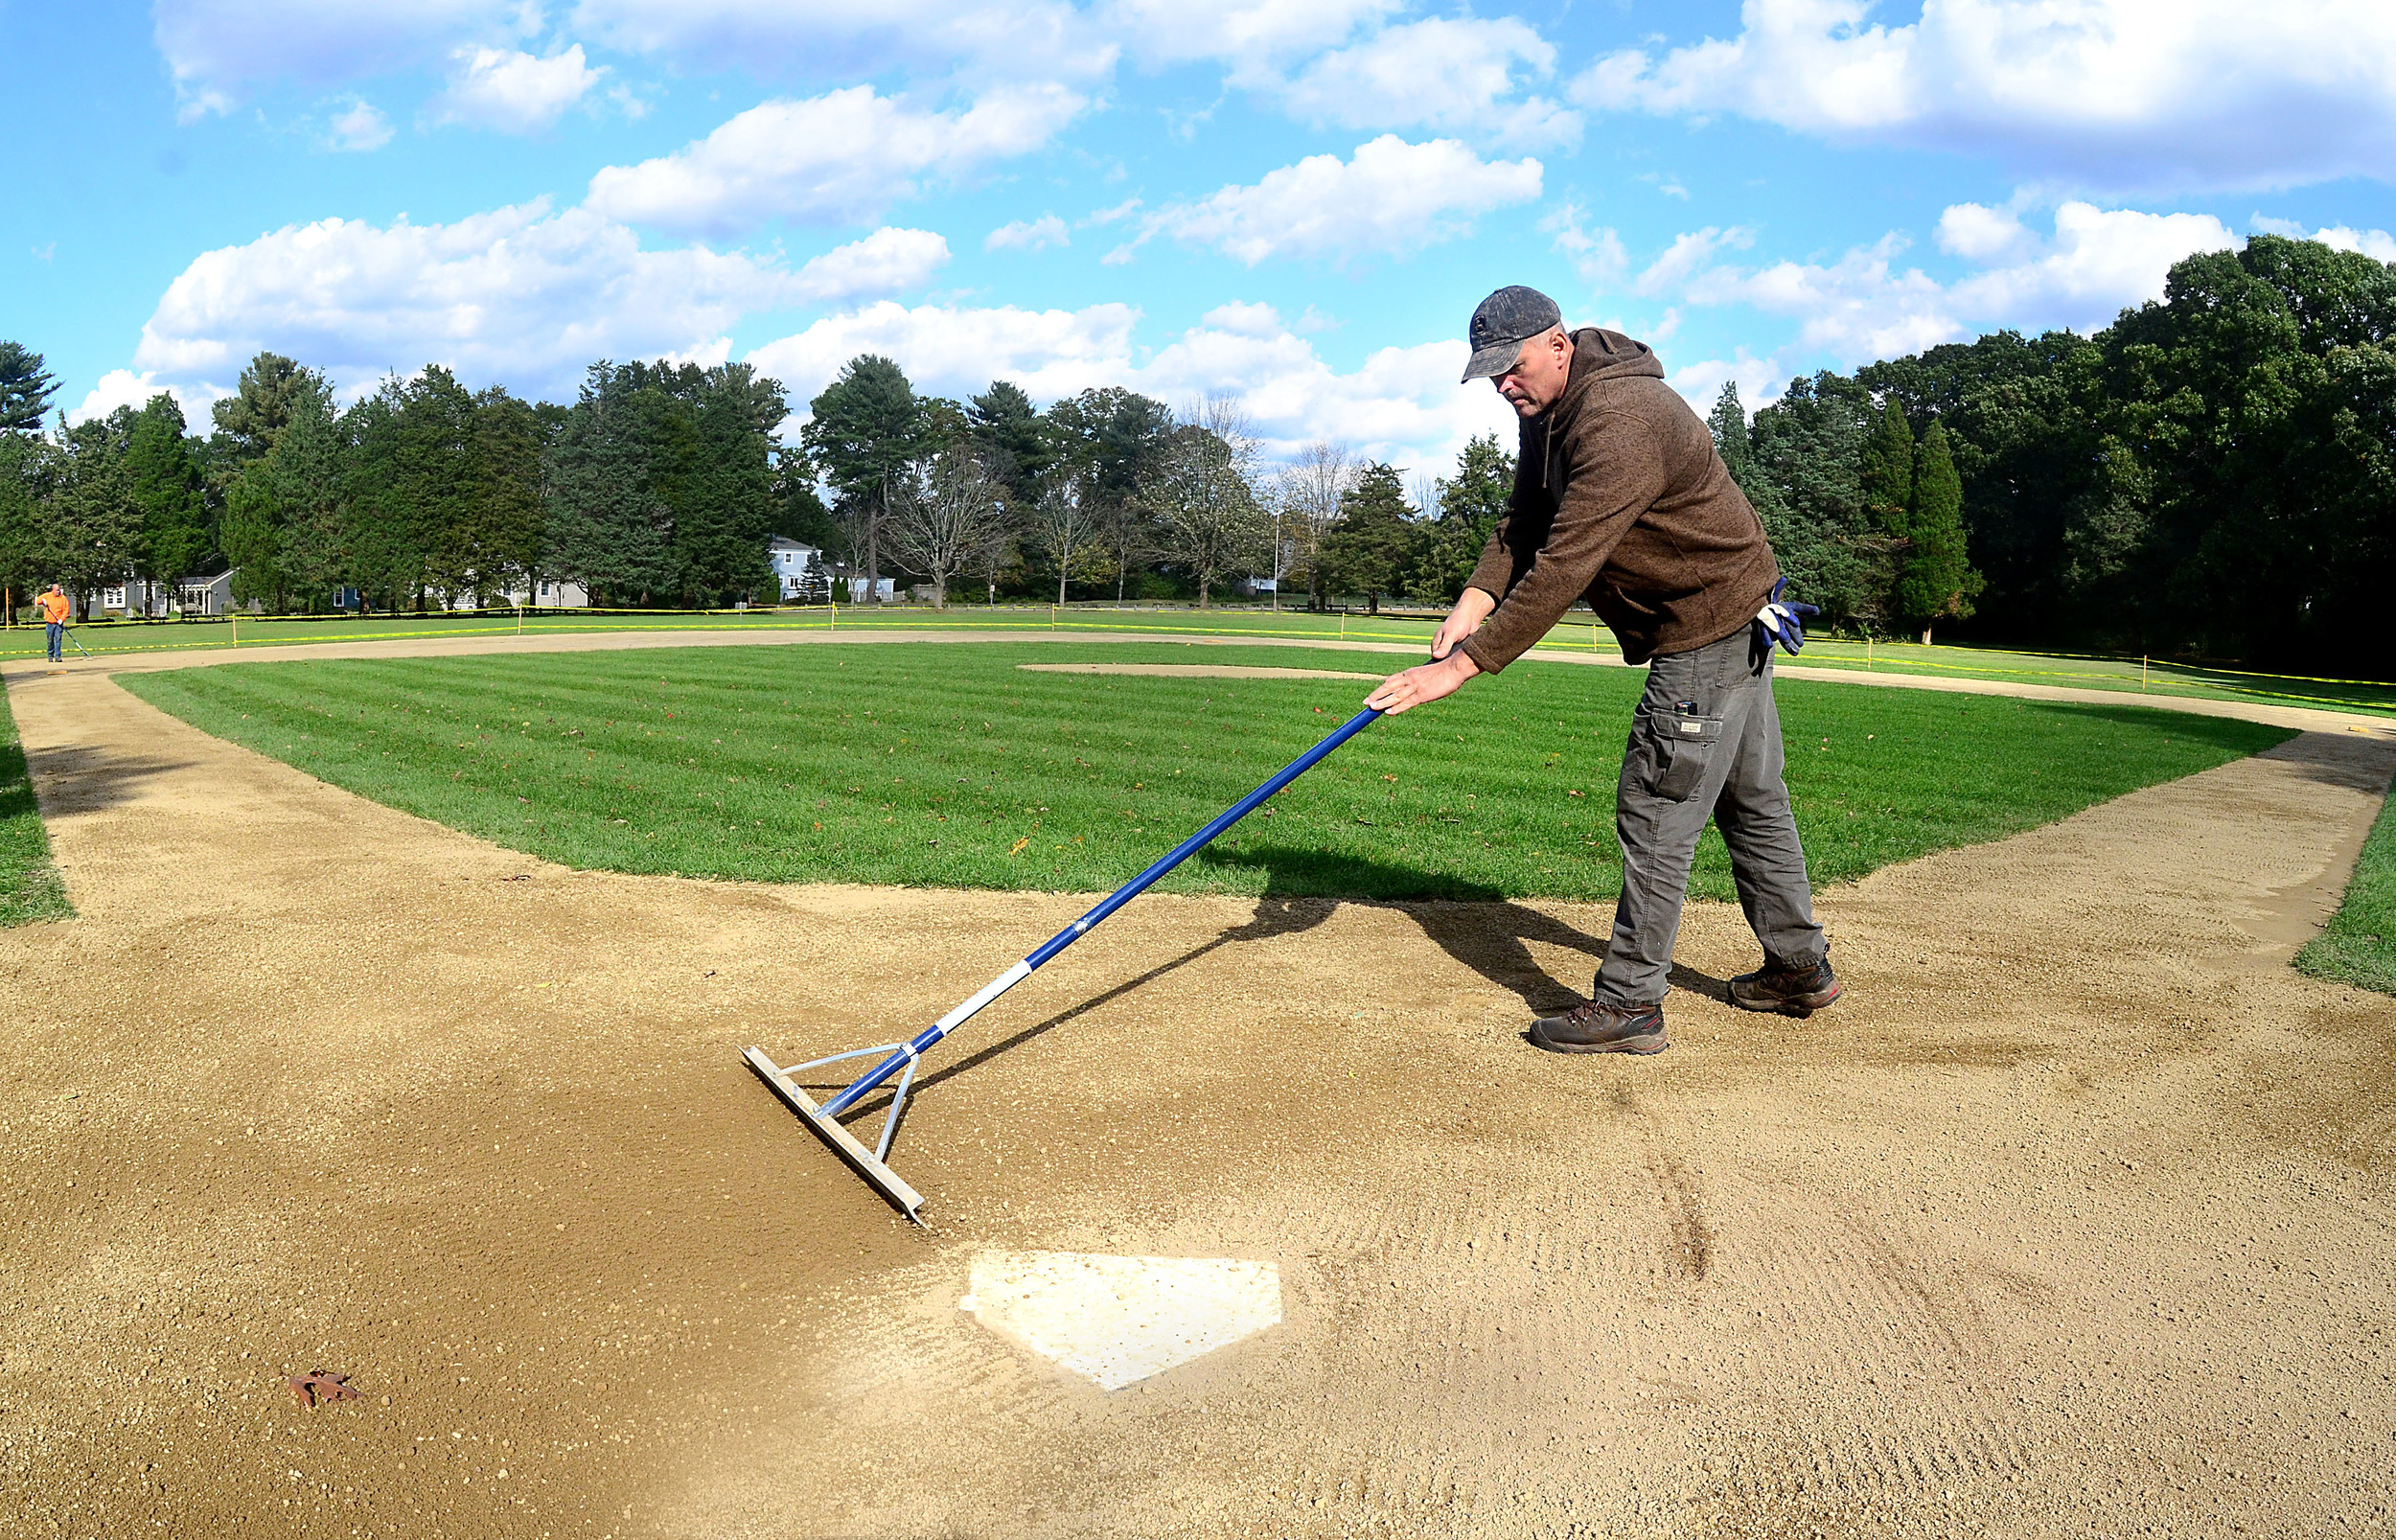 An account that had been solely dedicated to athletic field maintenance (such as the work pictured here at Haines Park), will now be used to pay for other types of projects.